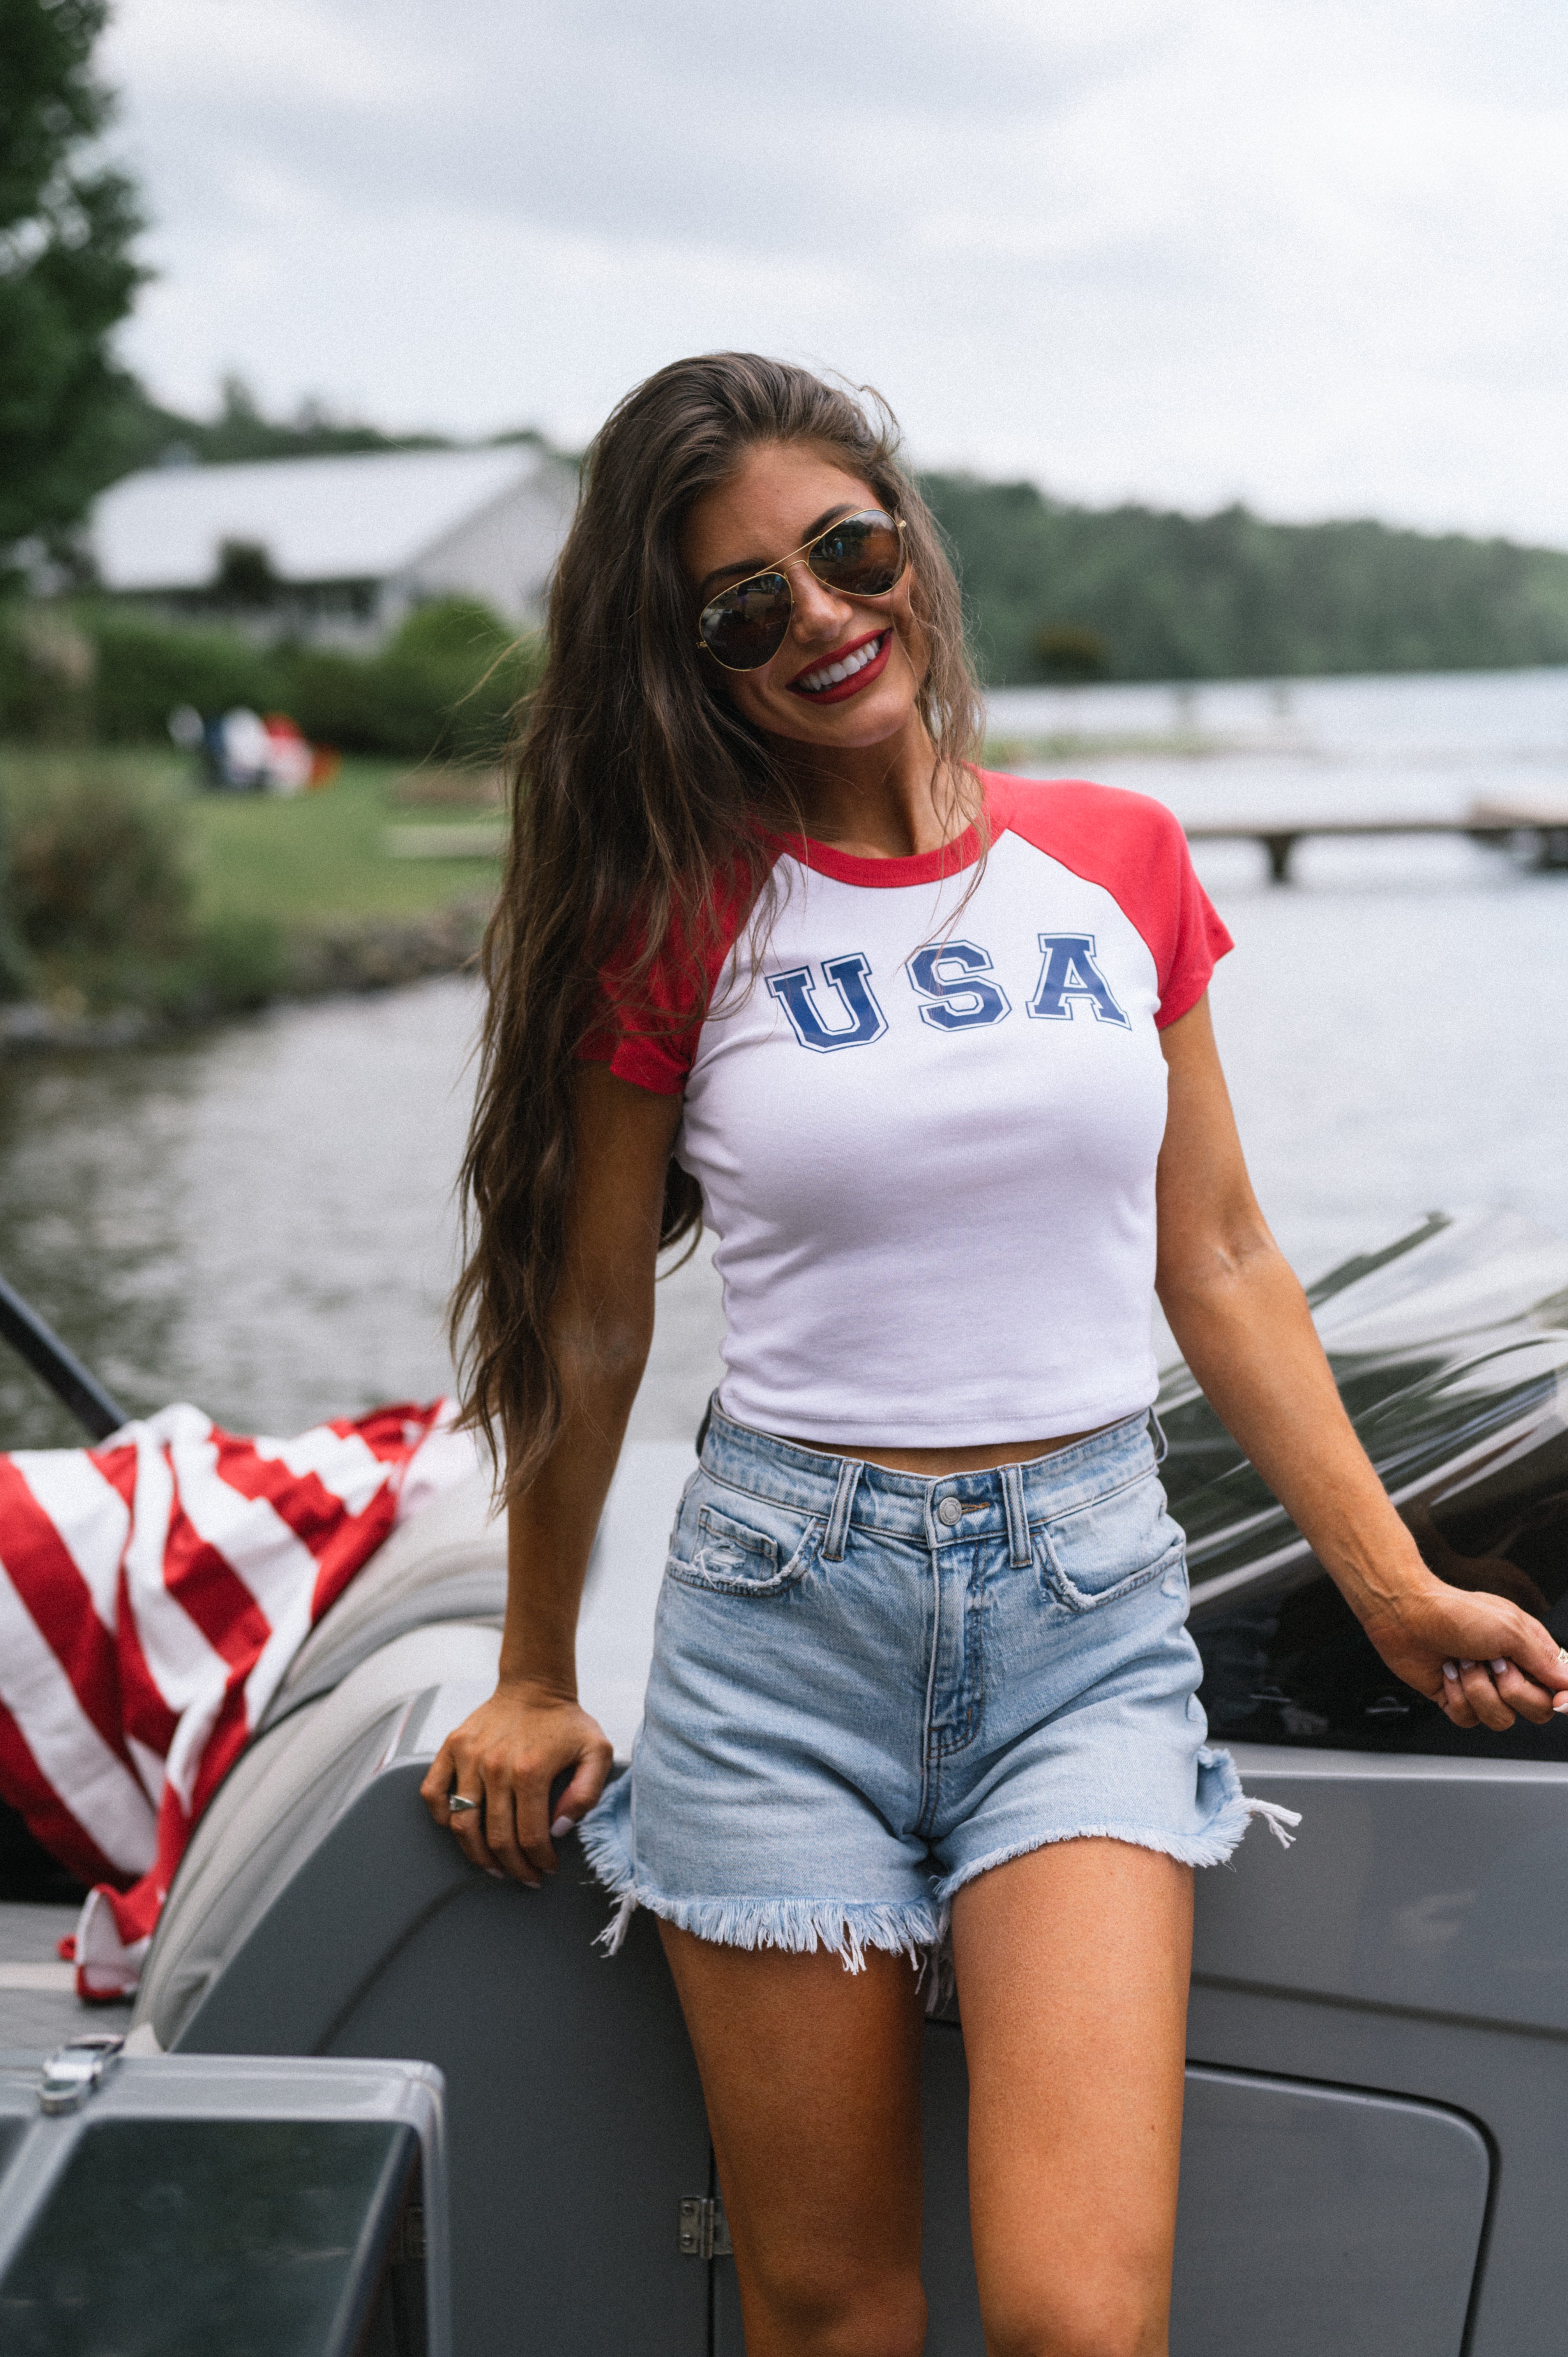 "USA" Top-Red/White